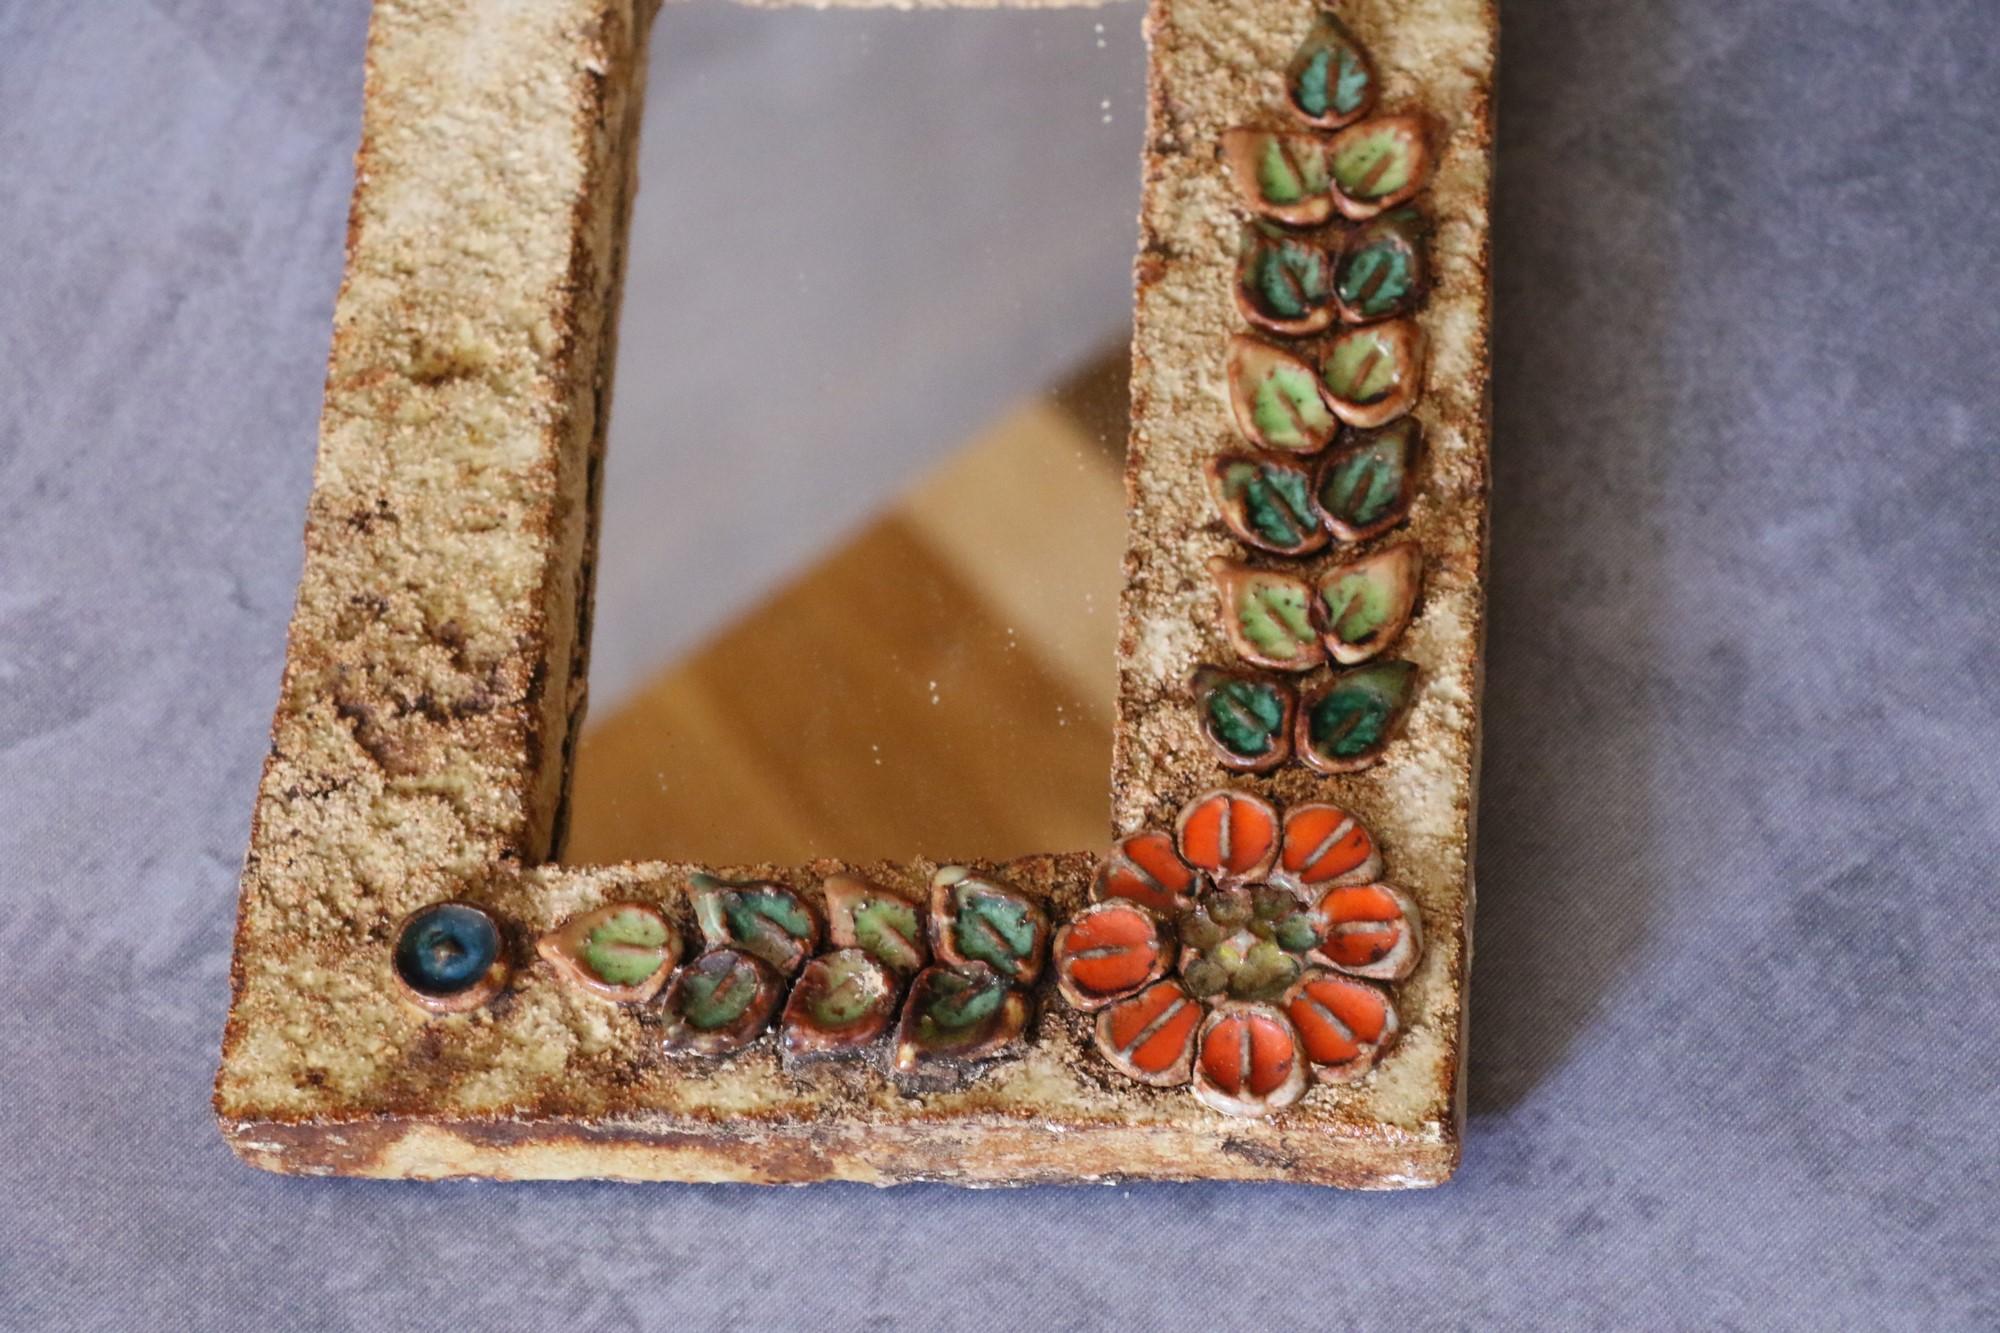 Enameled French Ceramic Mirror by La Roue Ceramic Studio, Vallauris, Flowers, 1950s For Sale